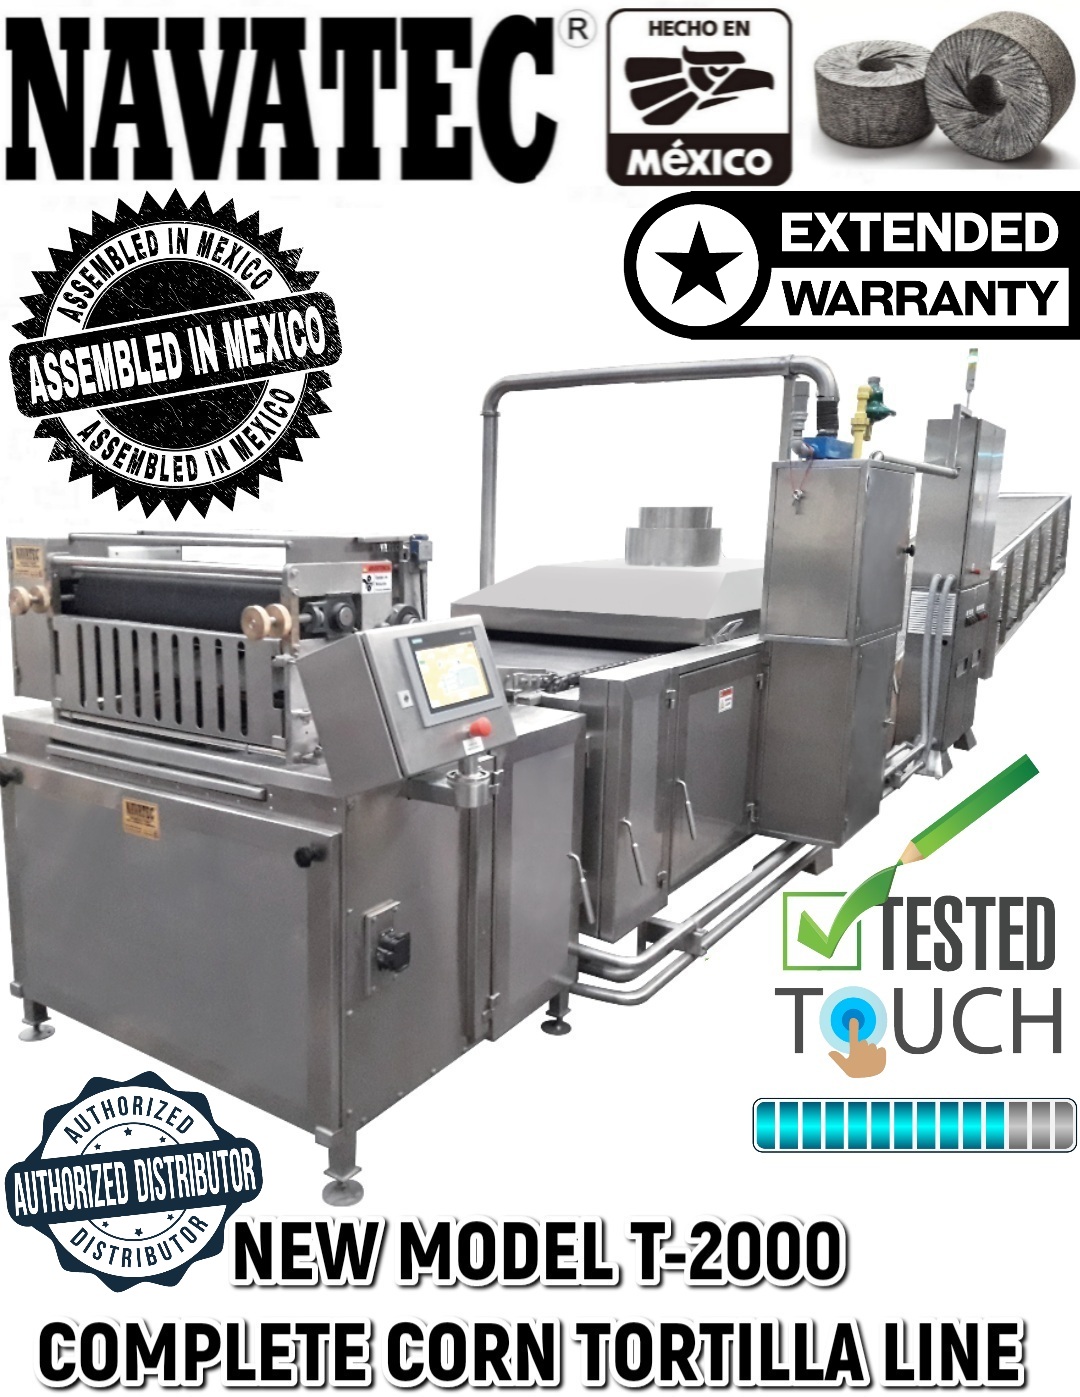 New Navatec® T-2000 is a 12 foot in length 4 row corn tortilla oven that can make up to 24,000 corn tortillas per hour for sale in the US with an extended manufacturers warranty exclusively by Tortillaworld.com. Call us at 773-882-2308 for pricing or more information. Specs: 3 slat belt baking bands, pre-mix combustion system, tachometer. 8.5" O.D. rollers, electronic variable speed control, Independent manually adjusted burner, variable speed blower, stainless steel frame, emergency stop wand for quick & easy stopping, standard button controls & electrical components, 230V/3phase and natural gas/propane gas, Options: CB-5 balance weave baking bands, Infrared burners over top belt, rubber exit belt conveyor, teflon coated rollers, 440V3 phase, PLC touchscreen made with all American made quality controls & electrical component